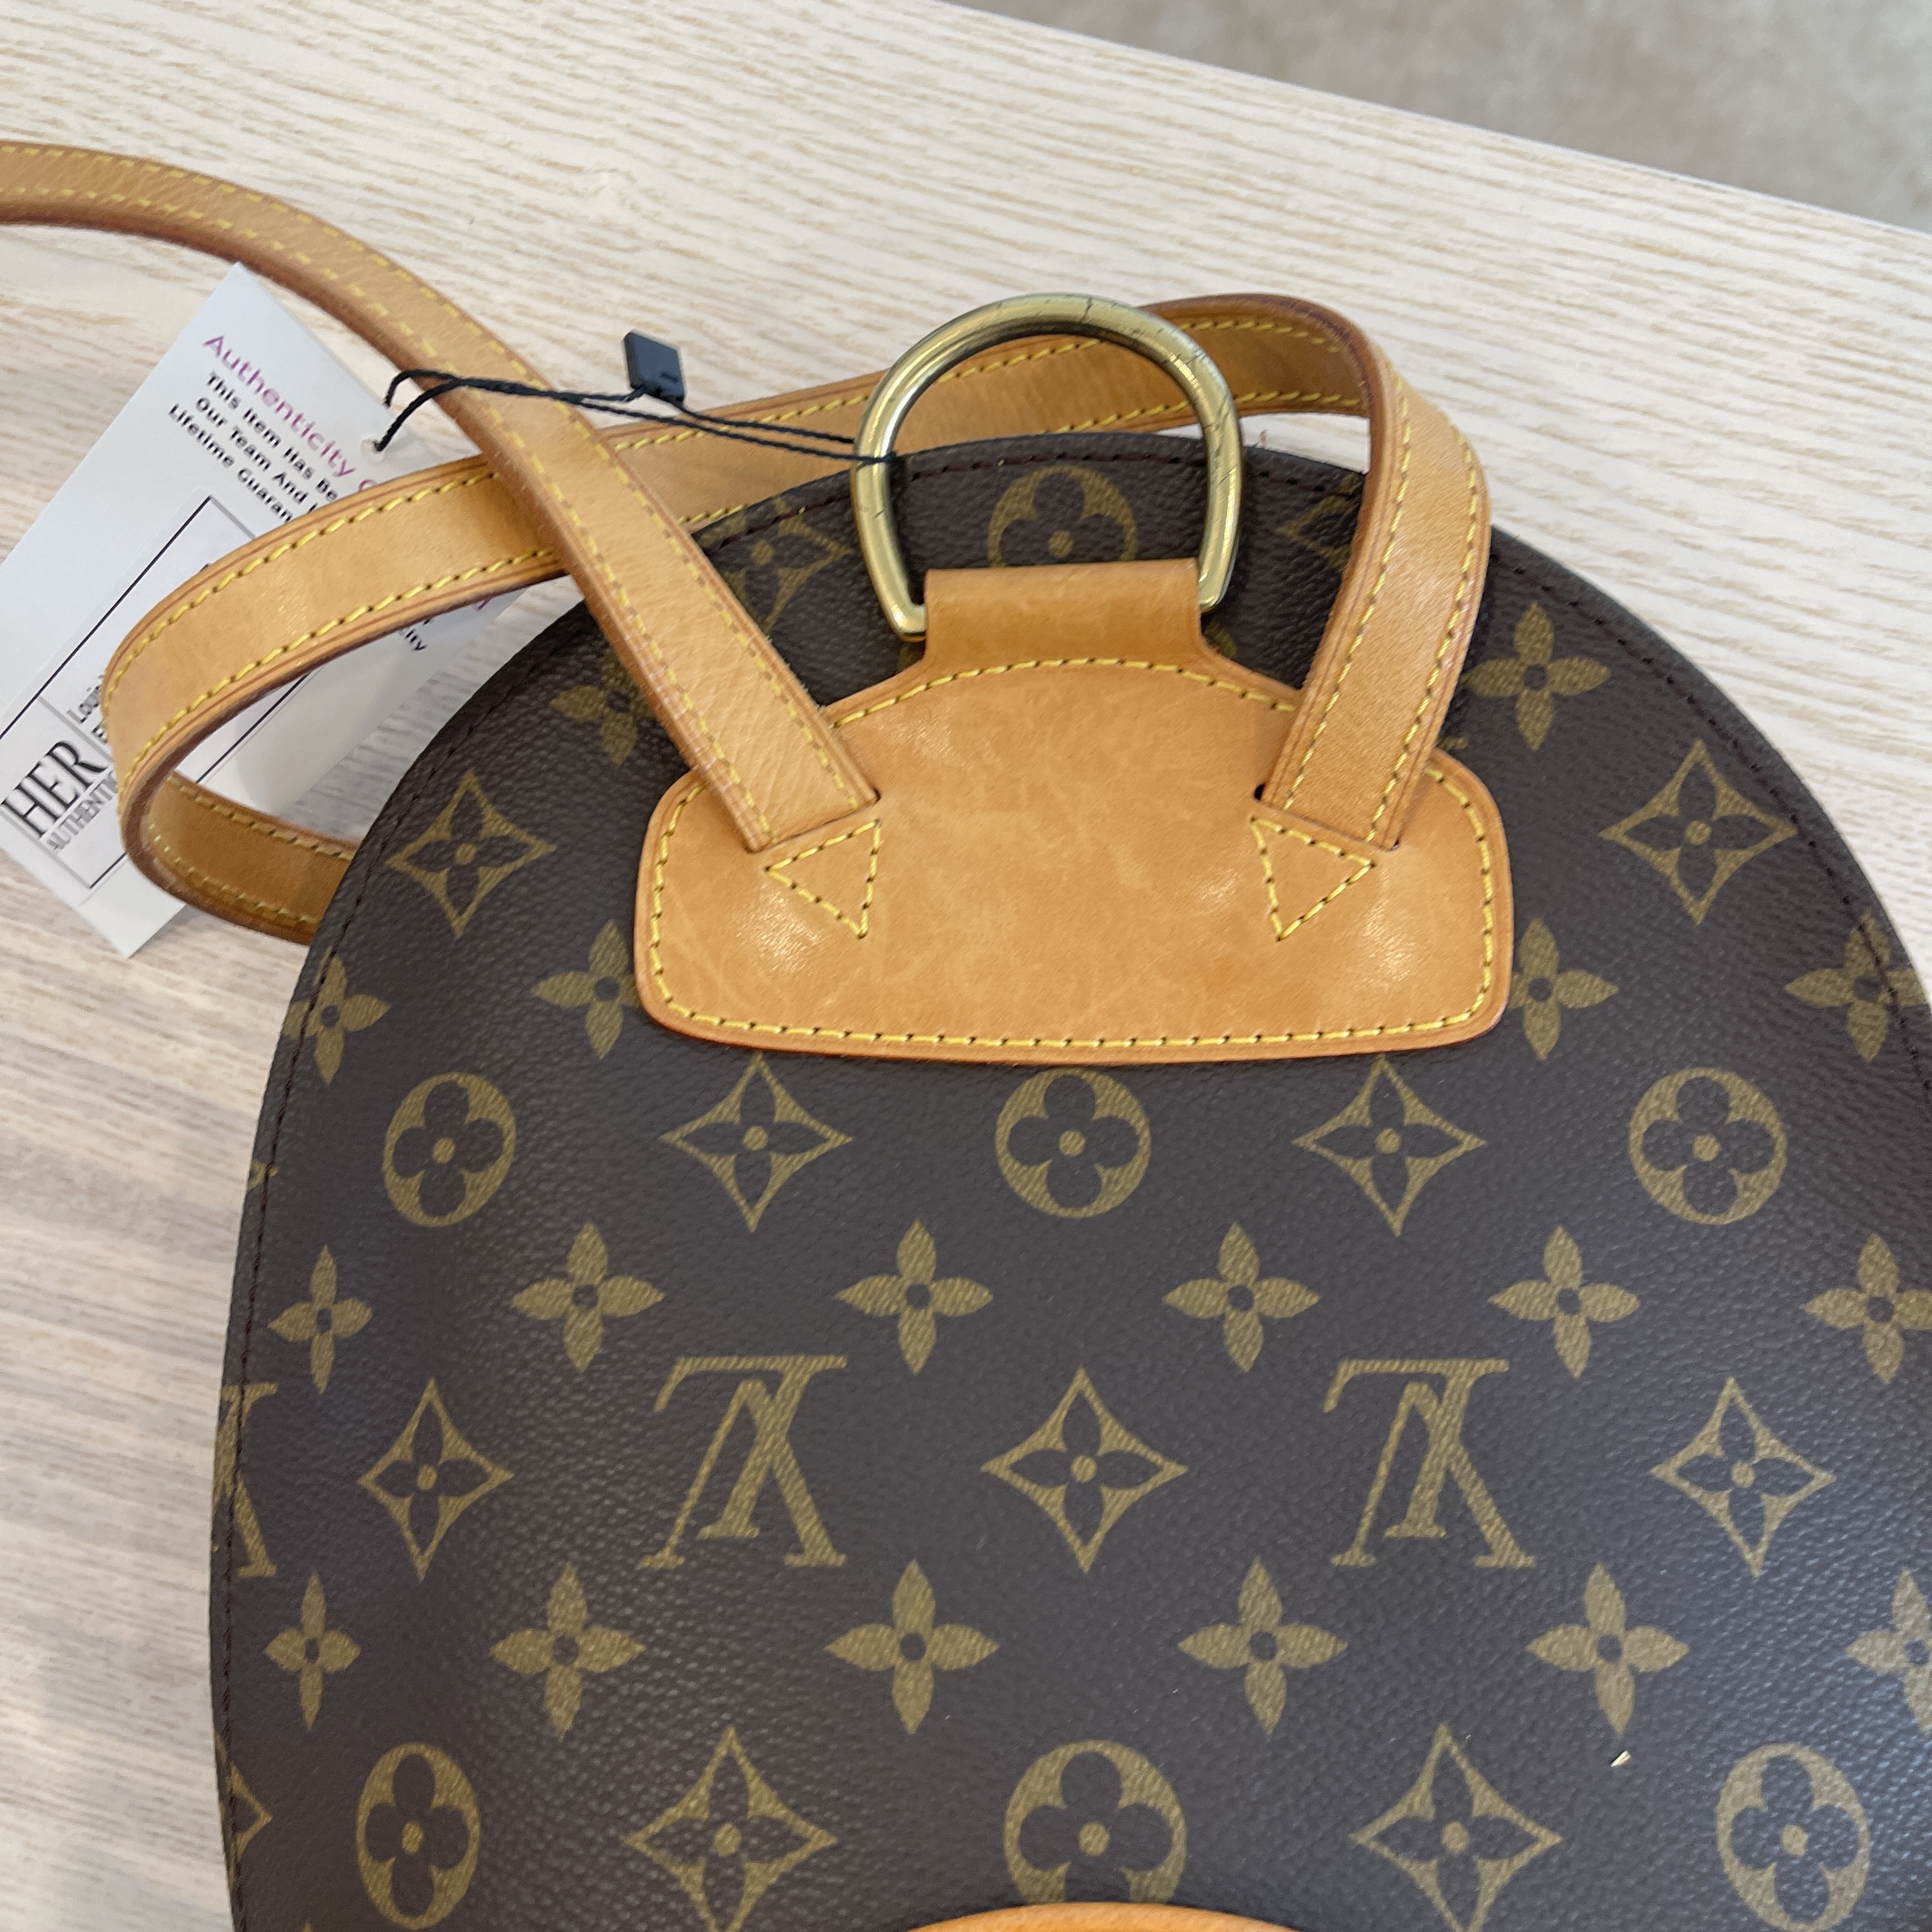 louis vuitton ellipse backpack real or fake